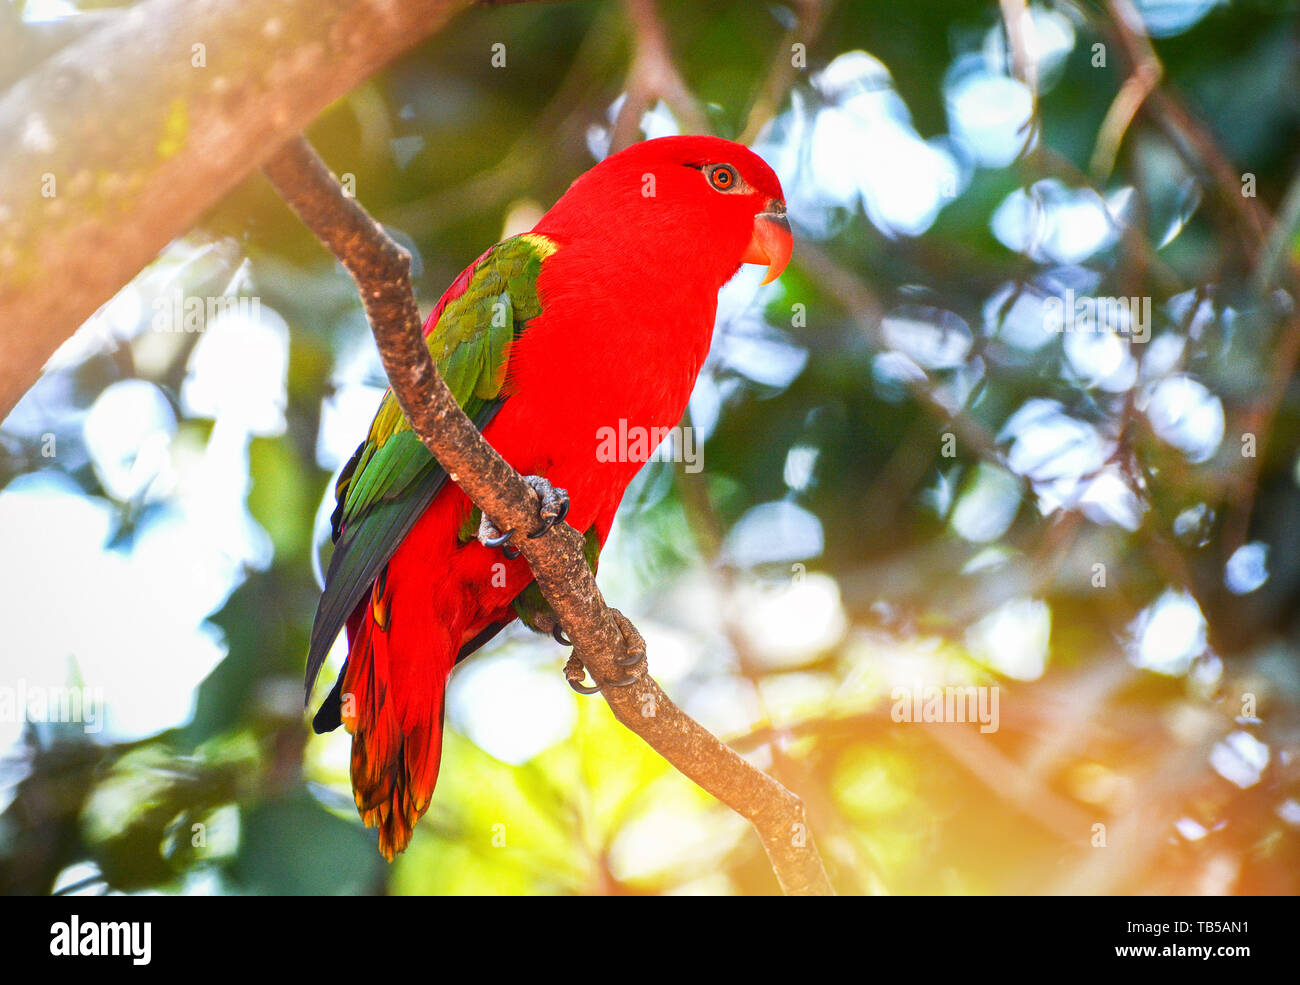 Chattering Lory parrot standing on branch tree nuture green background - beautiful red parrot bird (Lorius garrulus) Stock Photo